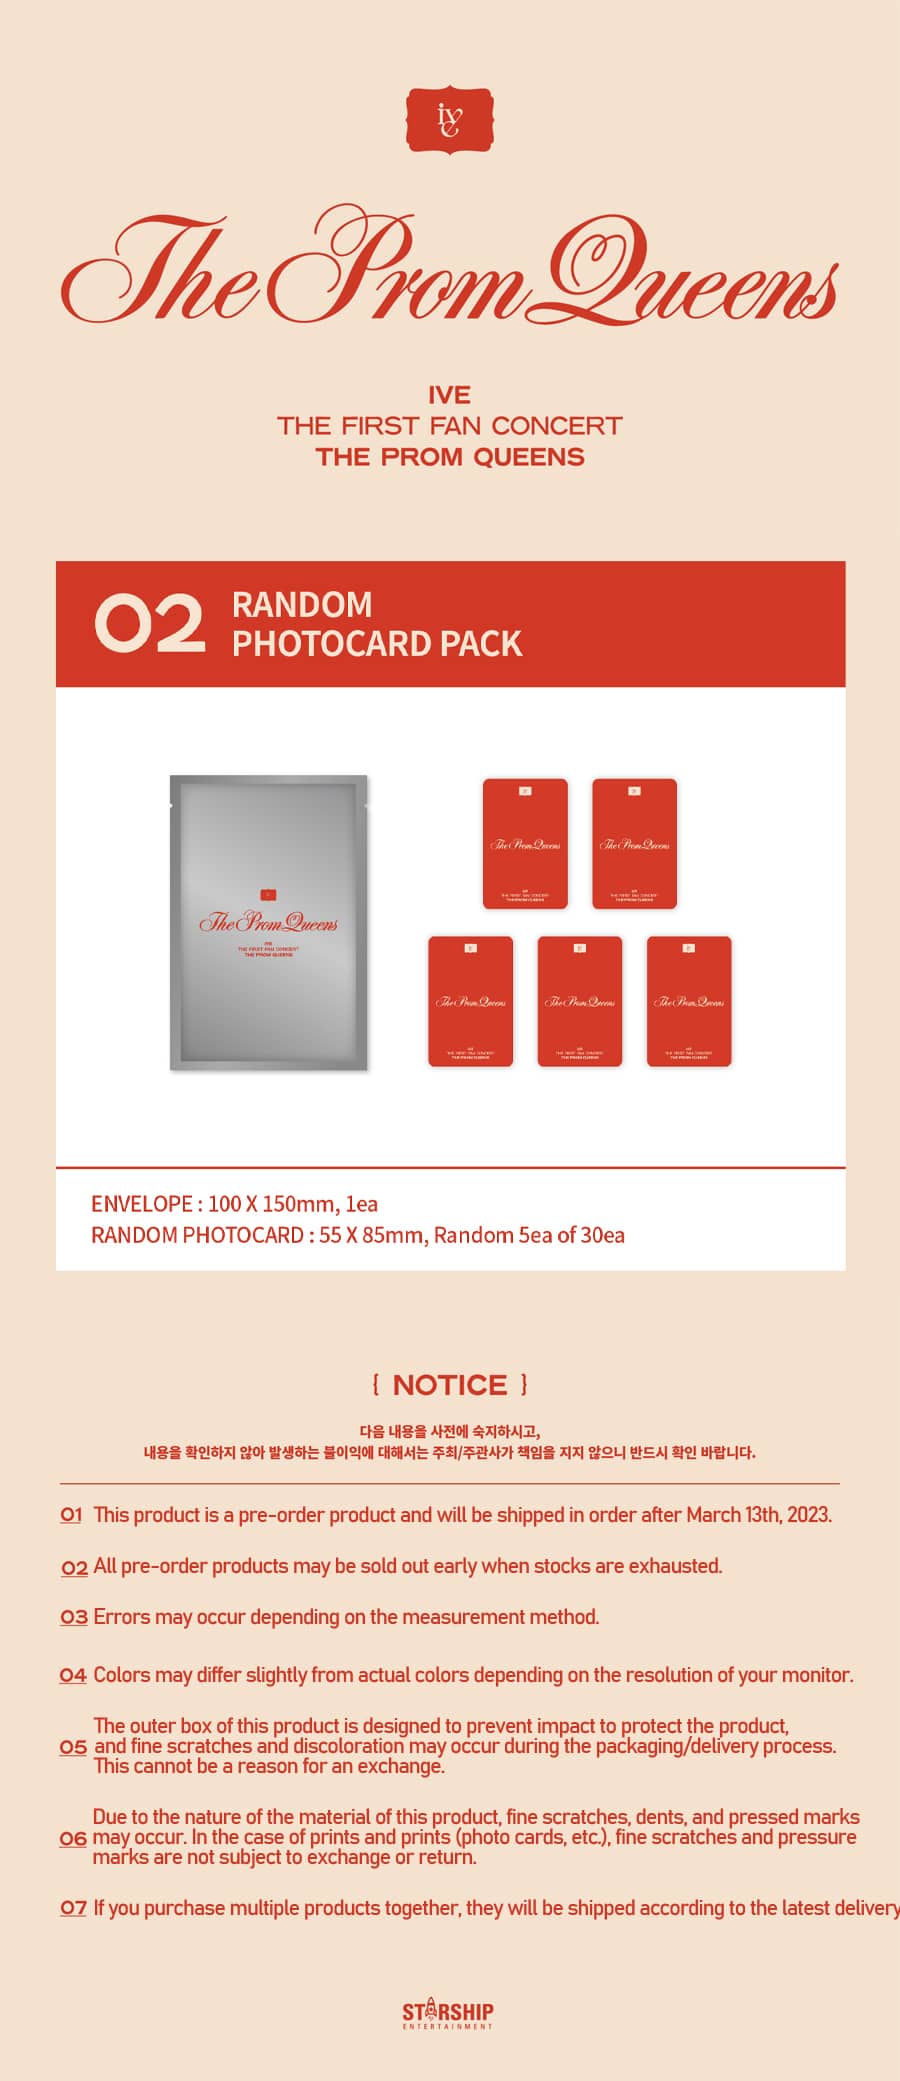 ive-the-prom-queens-random-photocard-pack-wholesale